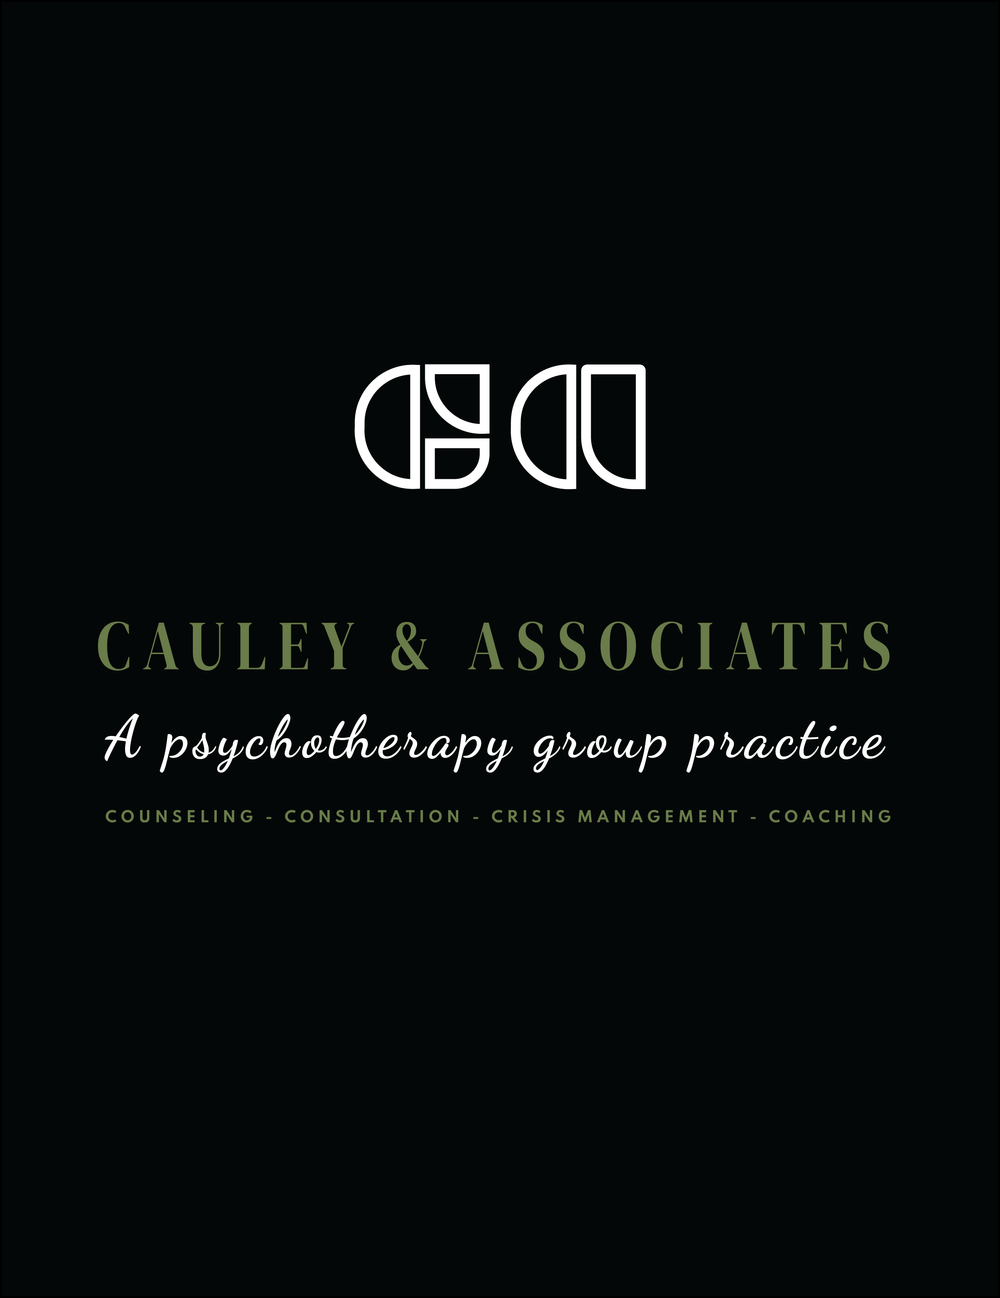 Cauley & Associates. A psychotherapy group practice. Counseling-Consultation-Crisis Management-Coaching. Healing Minds. Changing Lives.